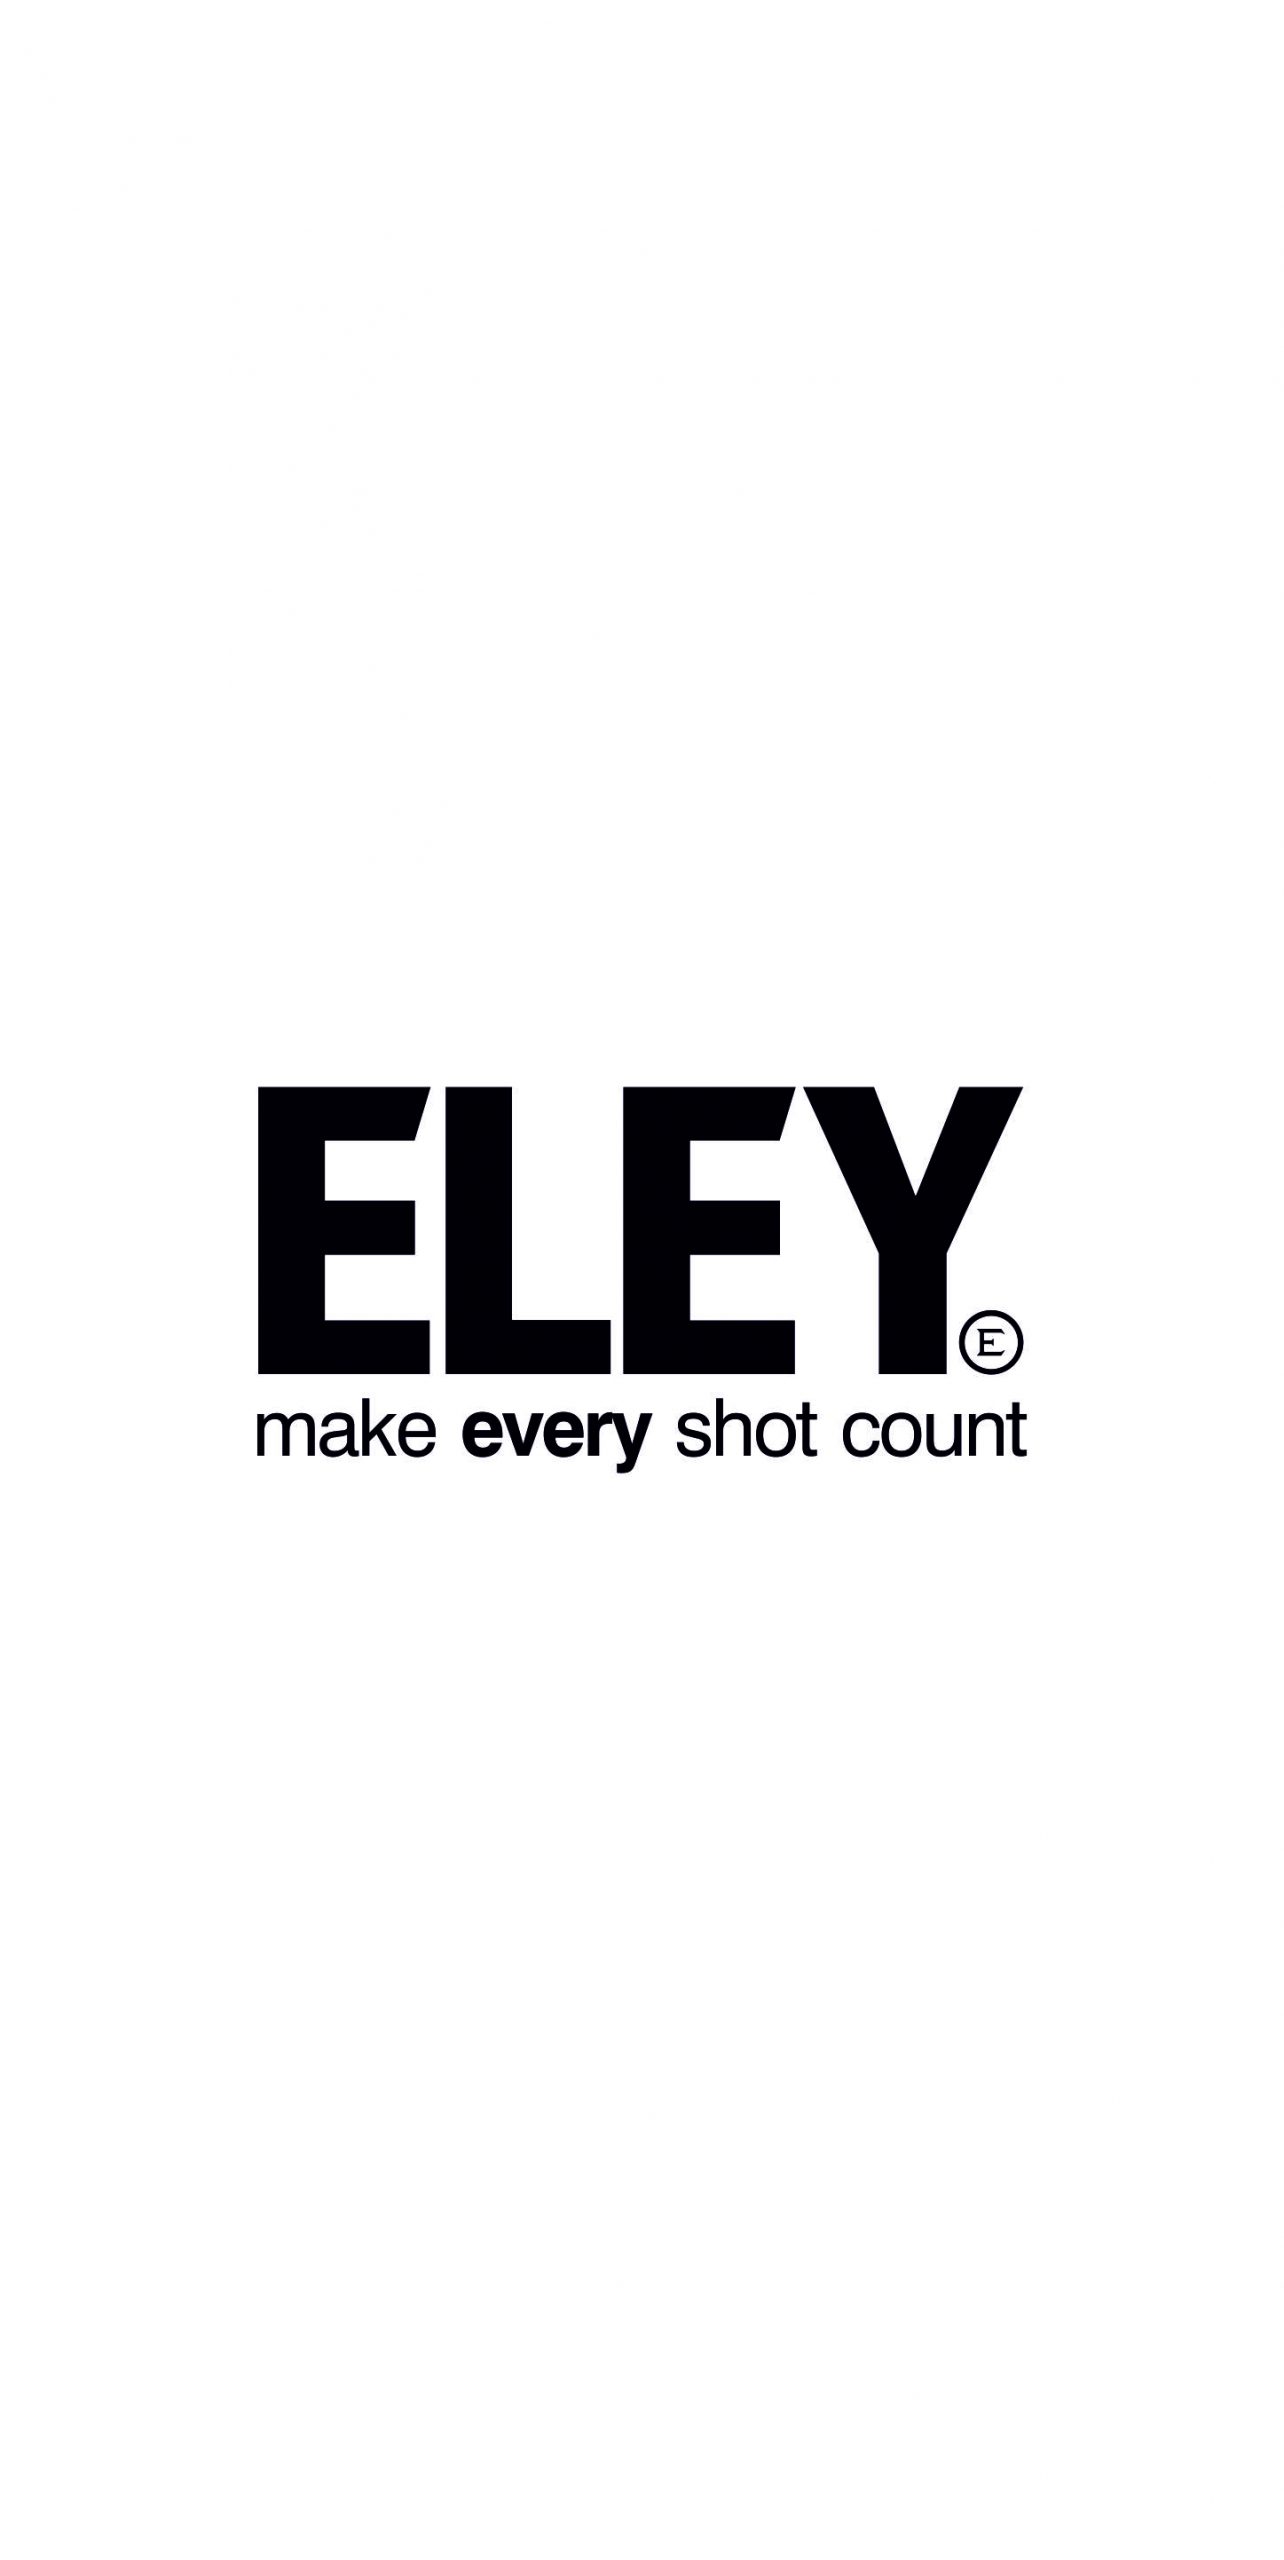 ELEY make every shot count